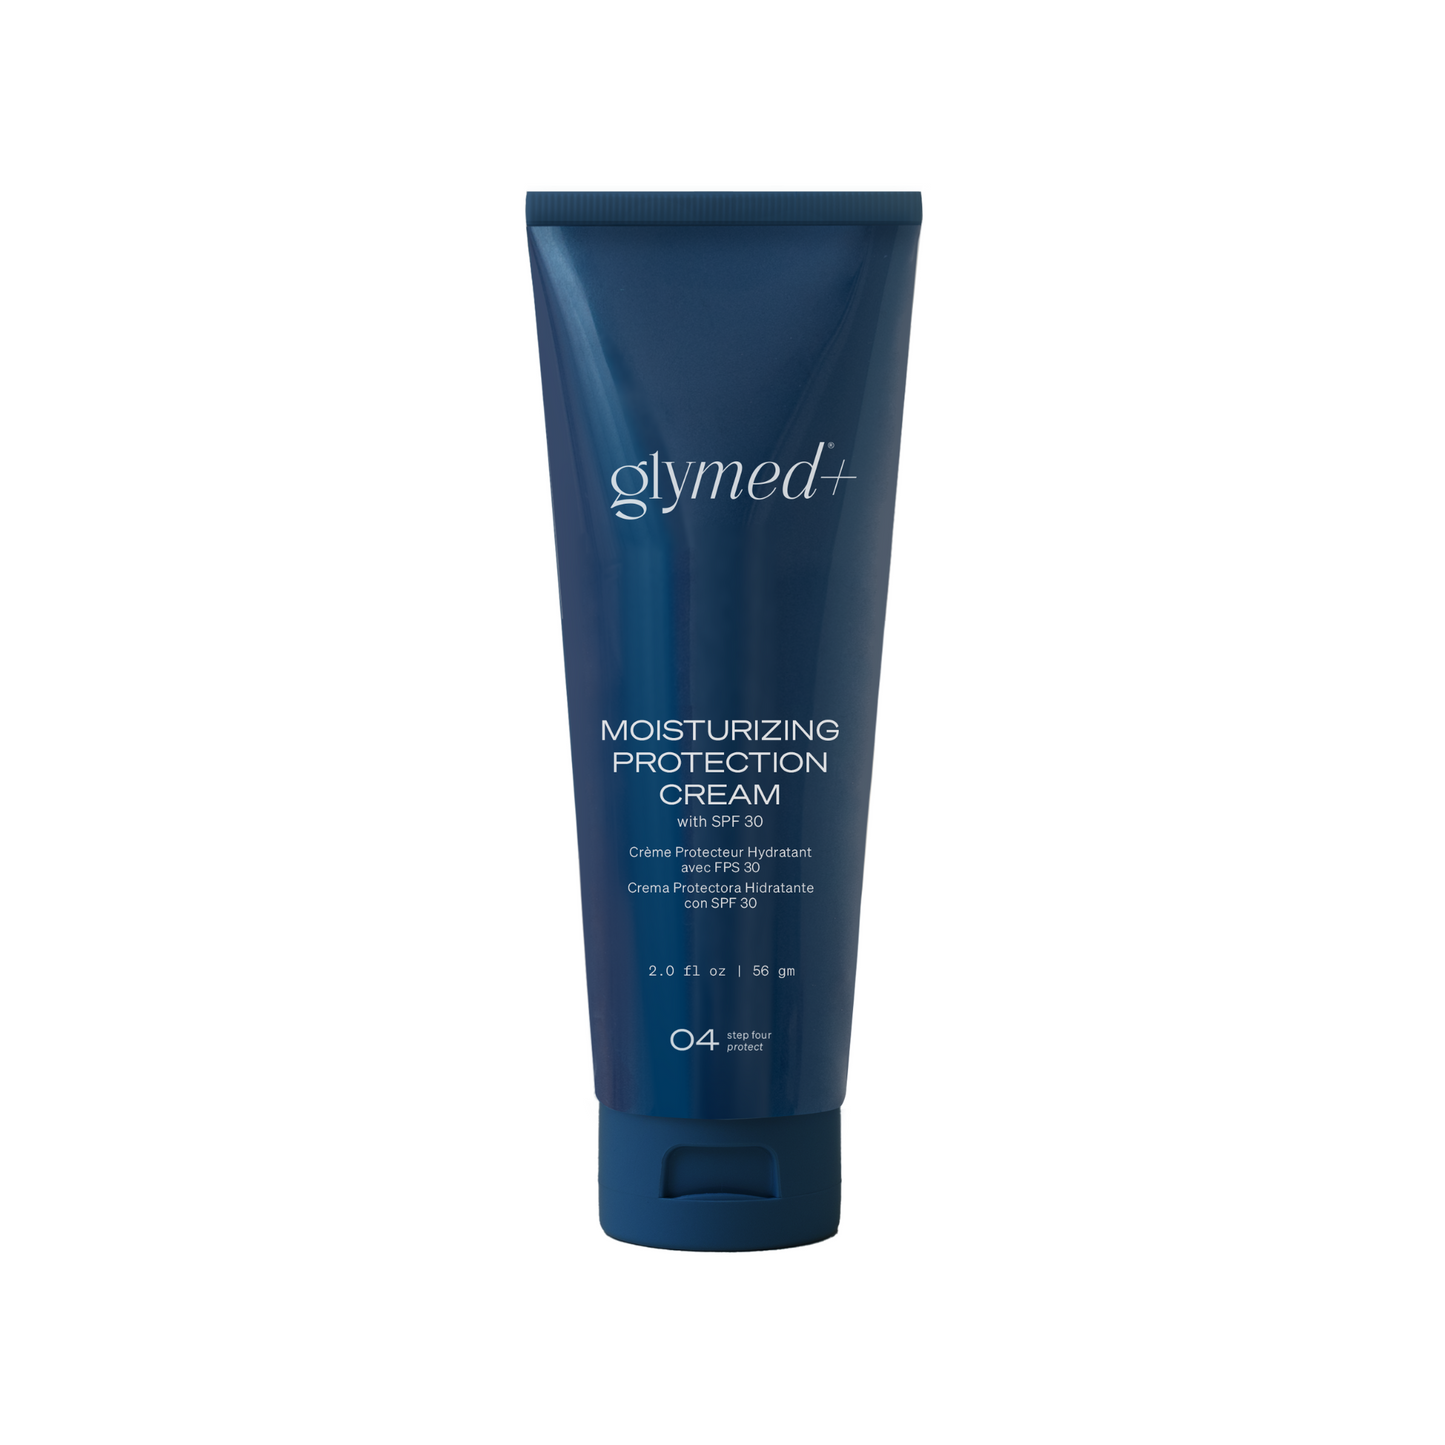 Moisturizing Protection Cream with SPF 30 | Glymed Plus